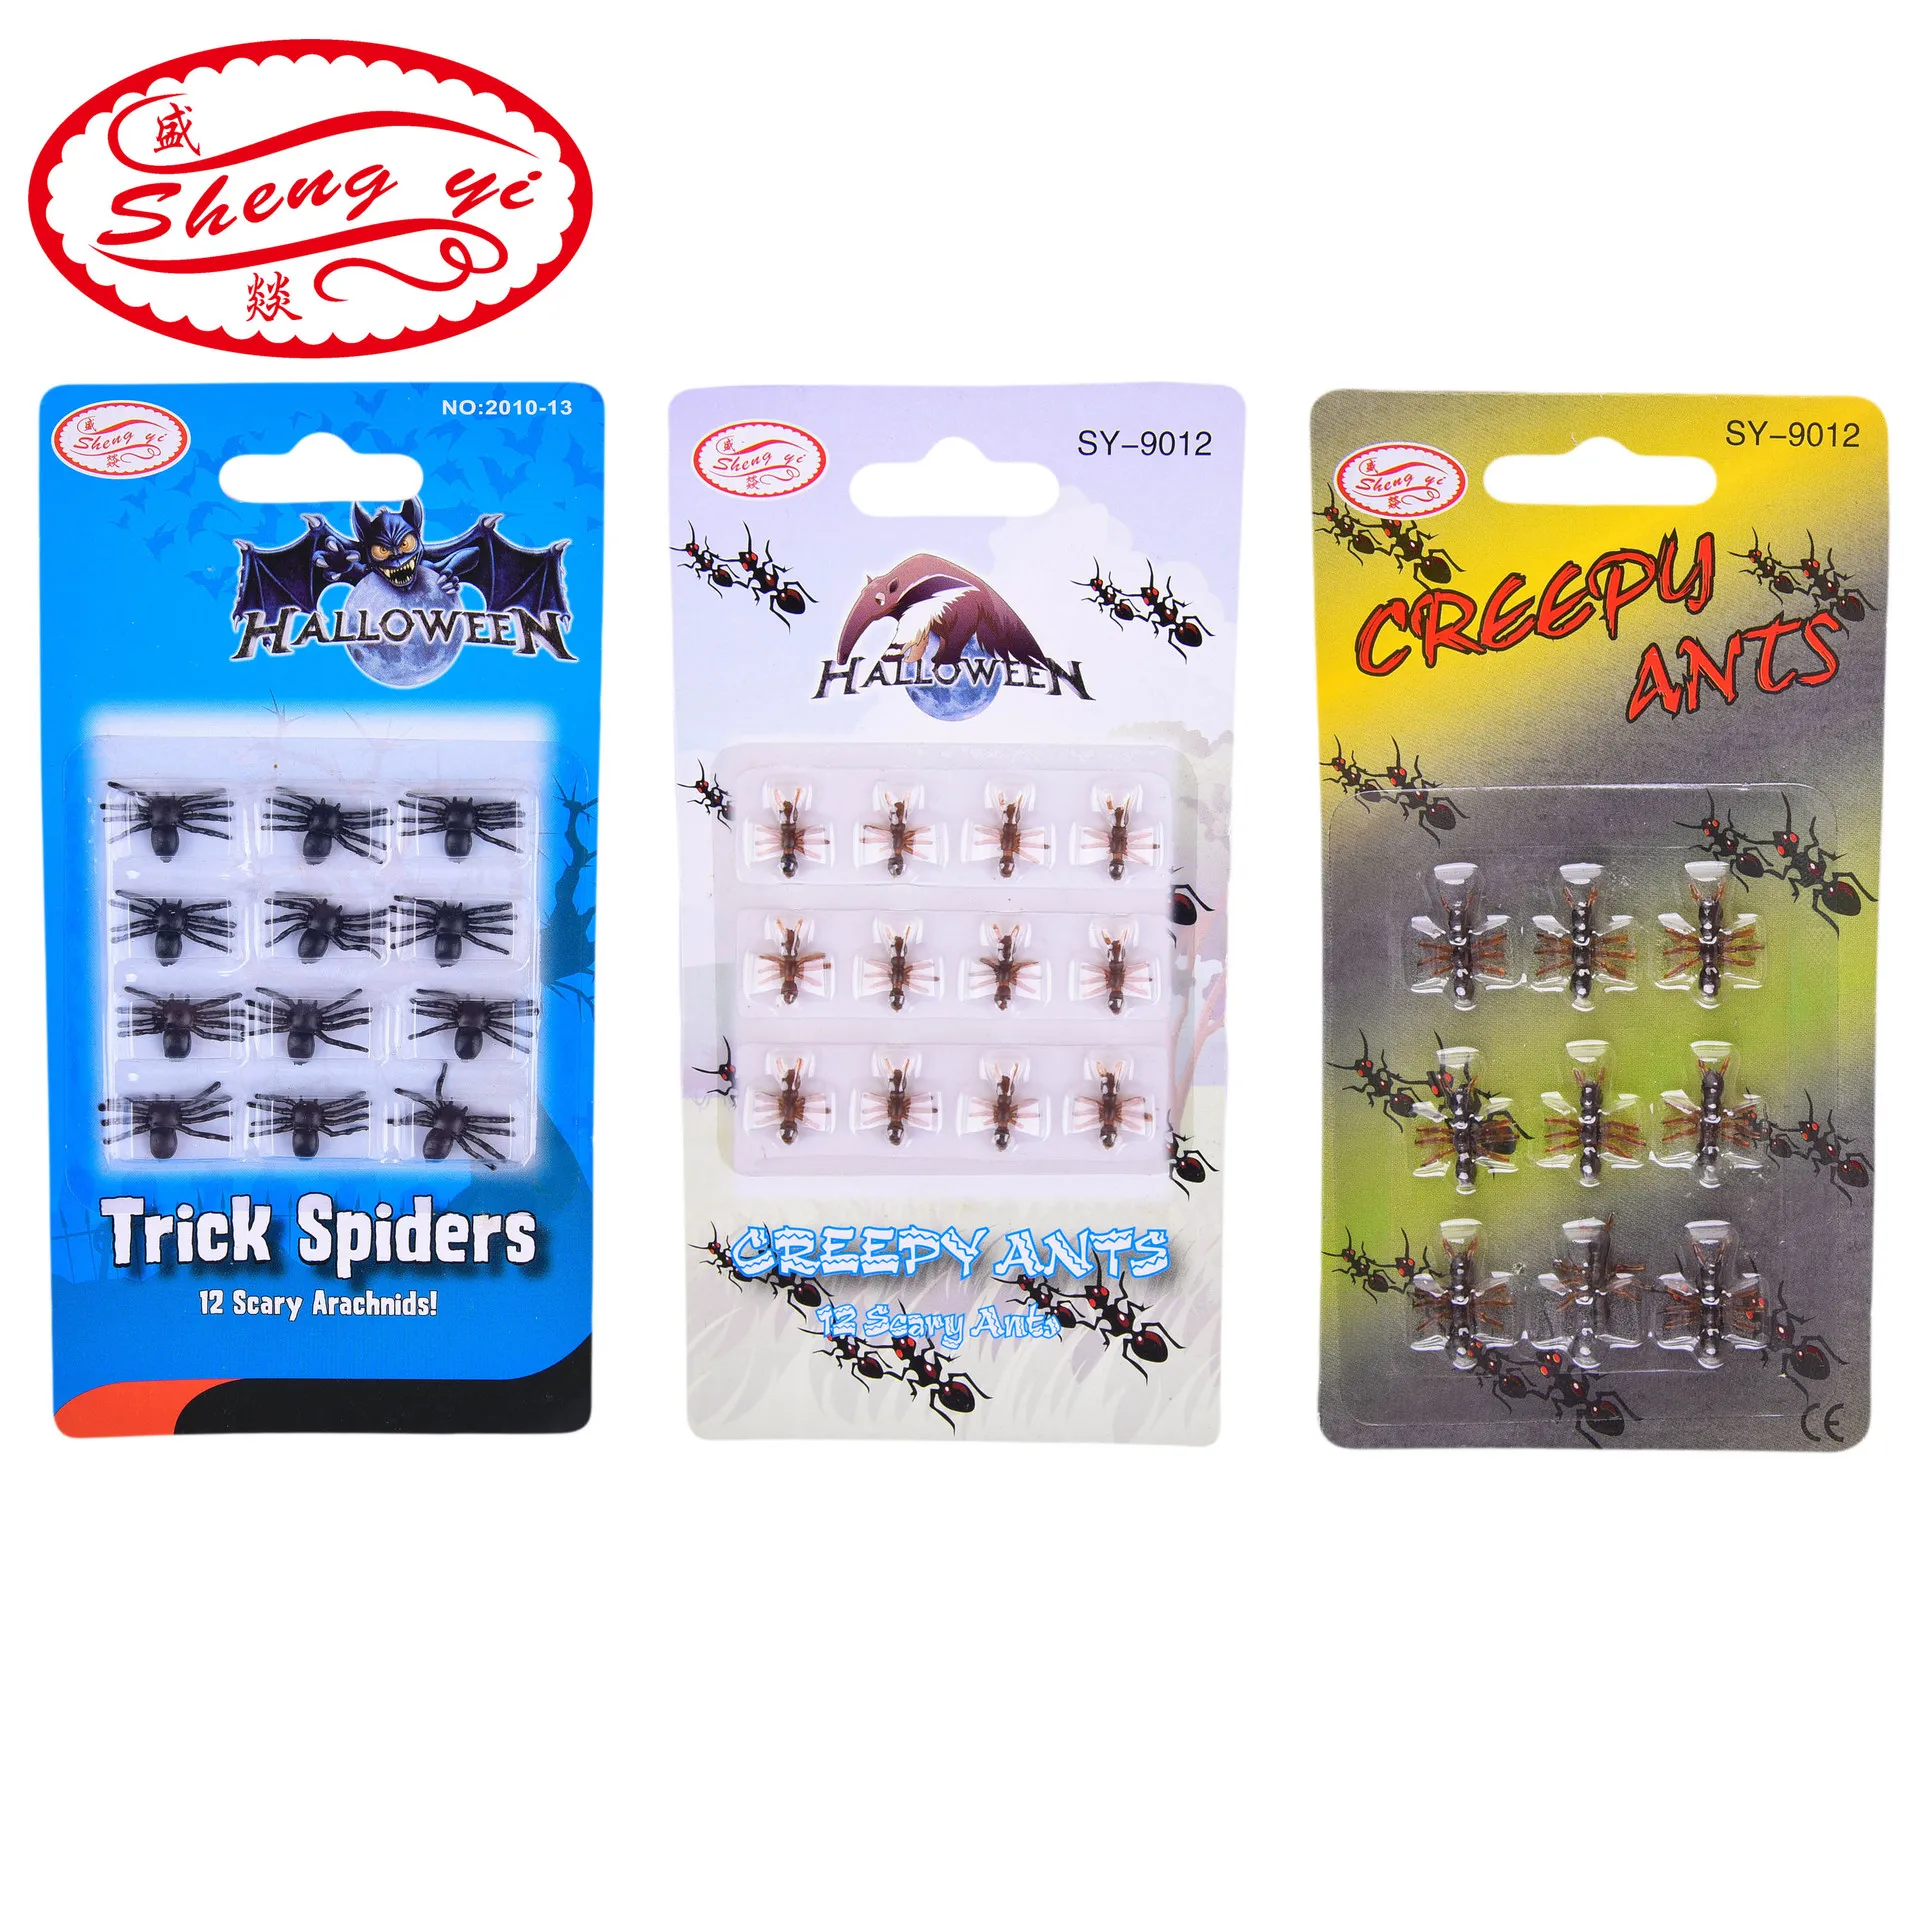 

April Fools' Day Novelty Tricky Insect Simulation Ants Spider Halloween Stimulating Plastic Realistic Ants Pranks Joking Toys